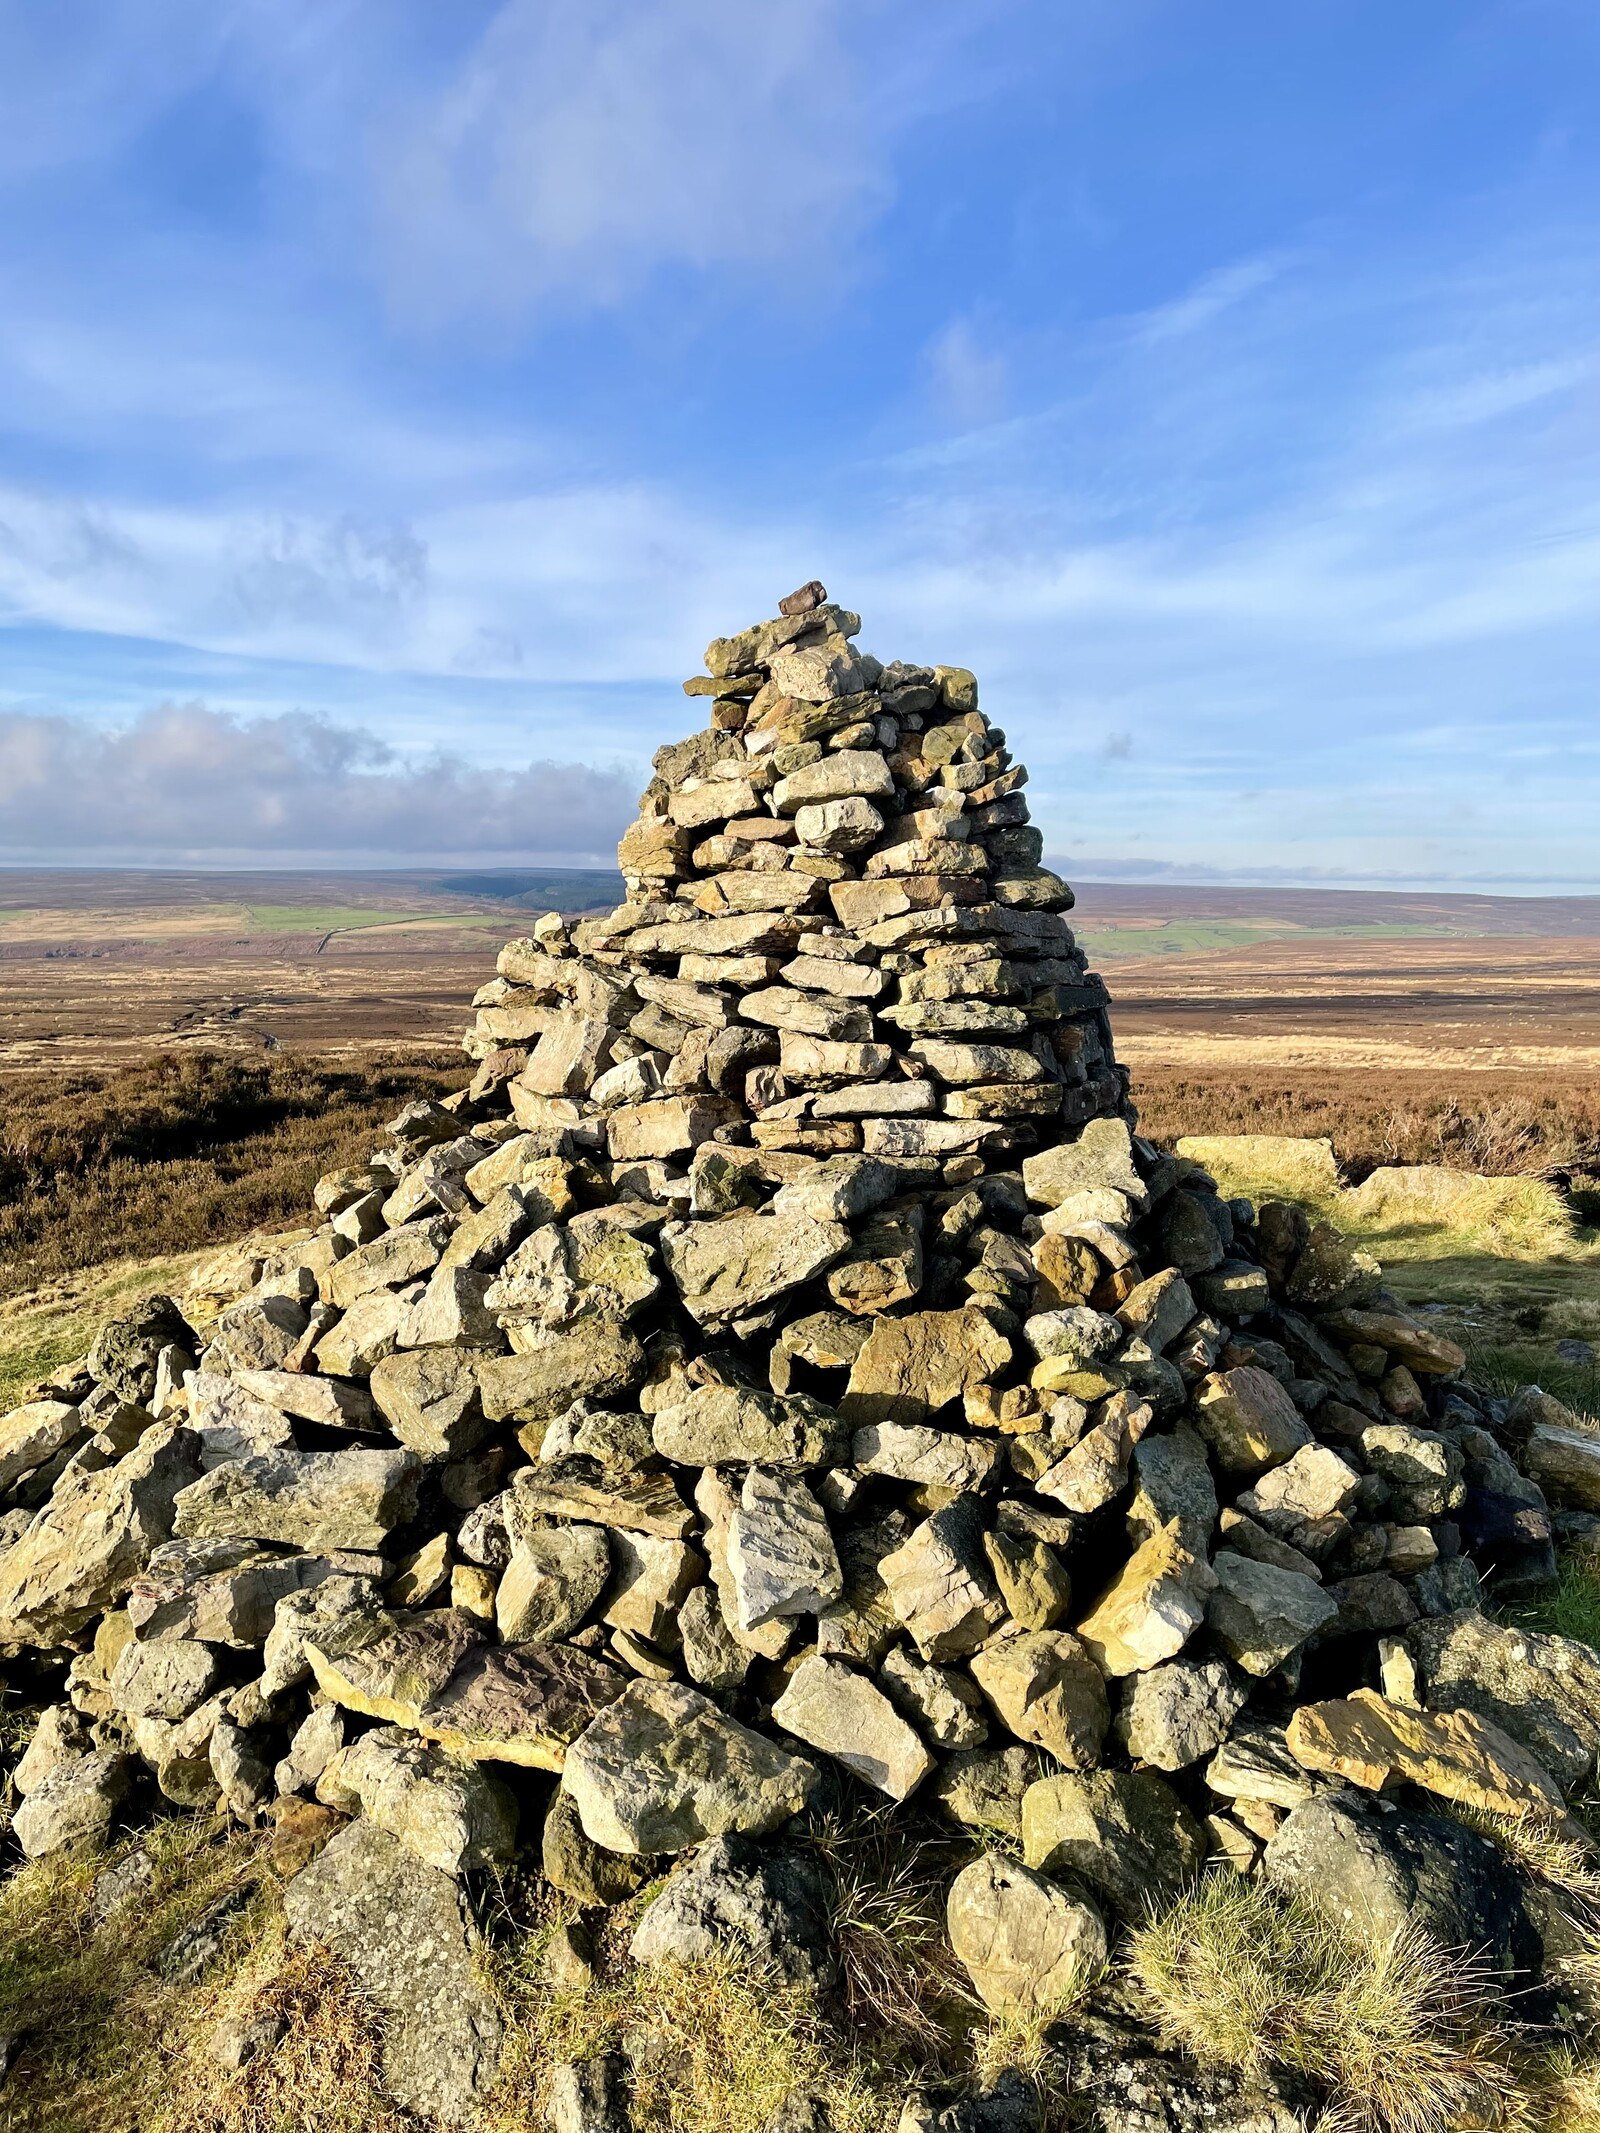 The cairn atop Simon Howe, easily taller than even a relative tall person